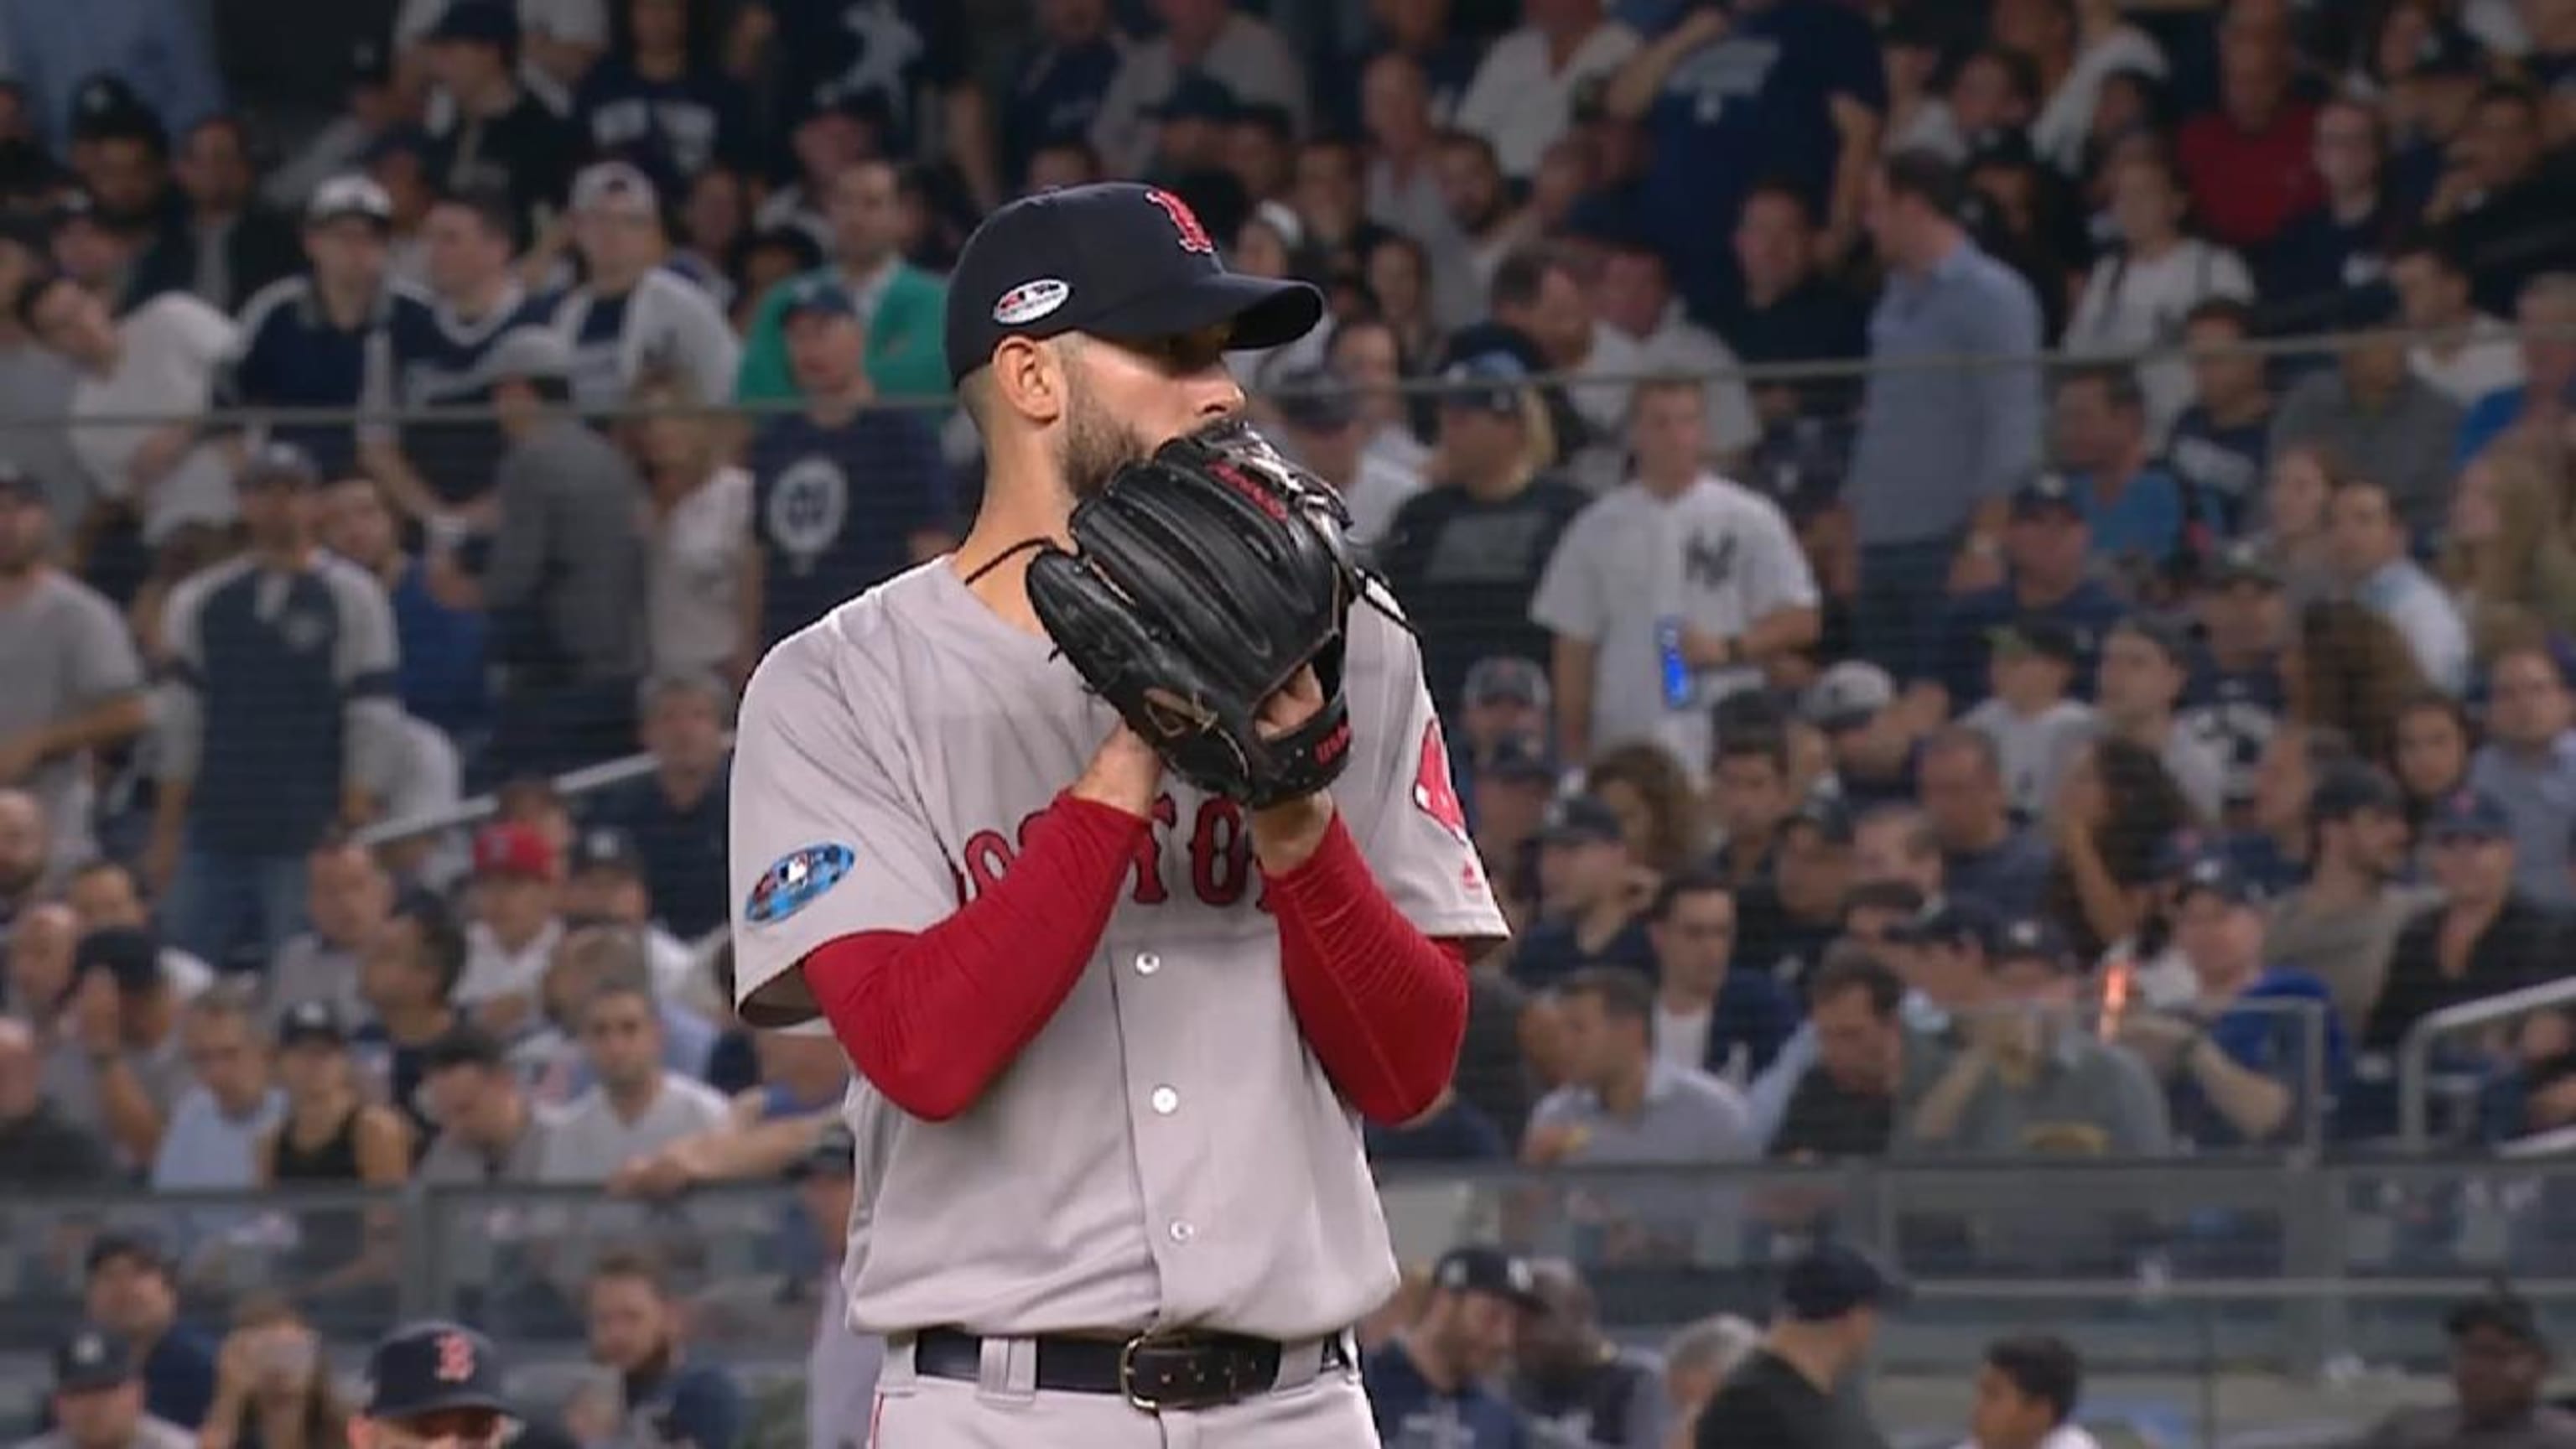 MLB playoffs: Red Sox punish Yankees at home to advance to ALCS